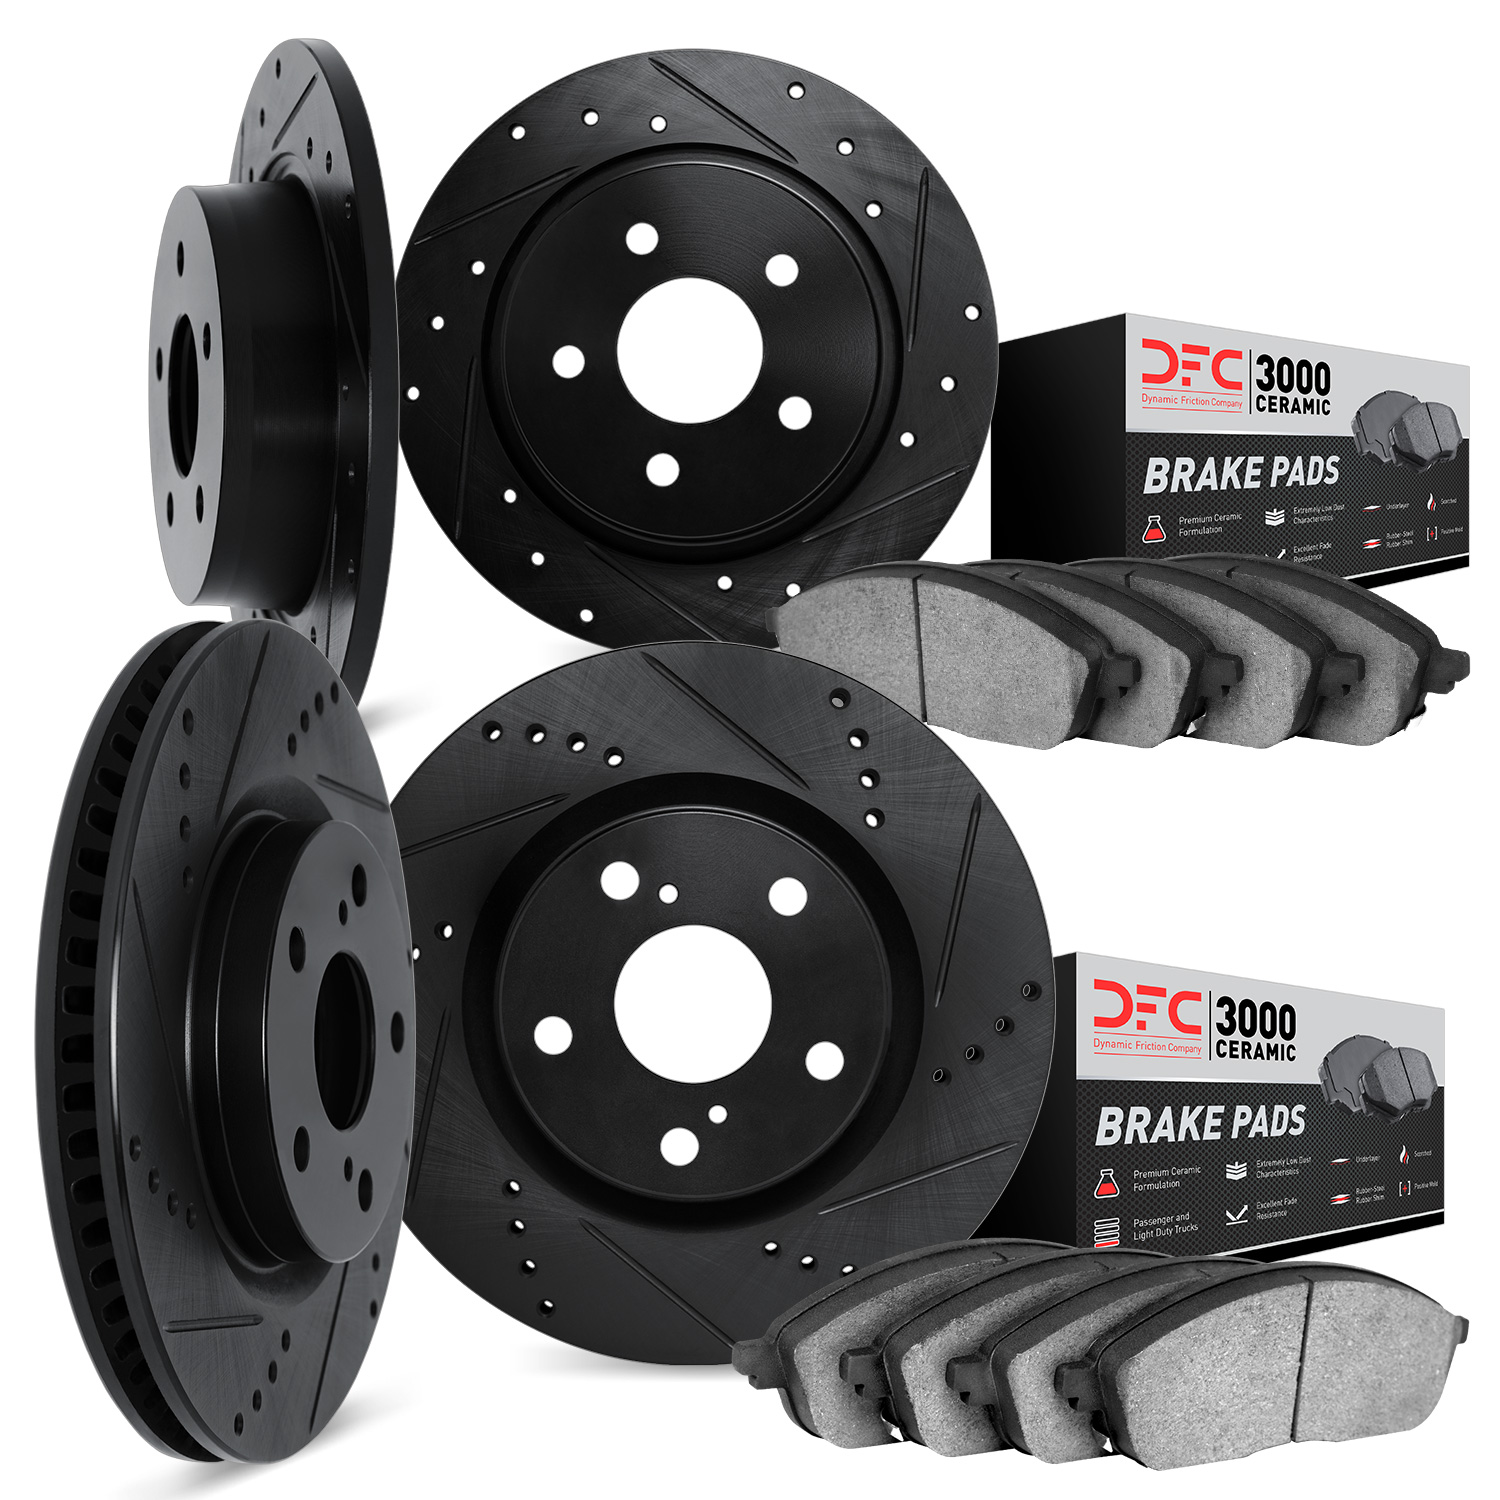 8304-13045 Drilled/Slotted Brake Rotors with 3000-Series Ceramic Brake Pads Kit [Black], 2010-2014 Subaru, Position: Front and R